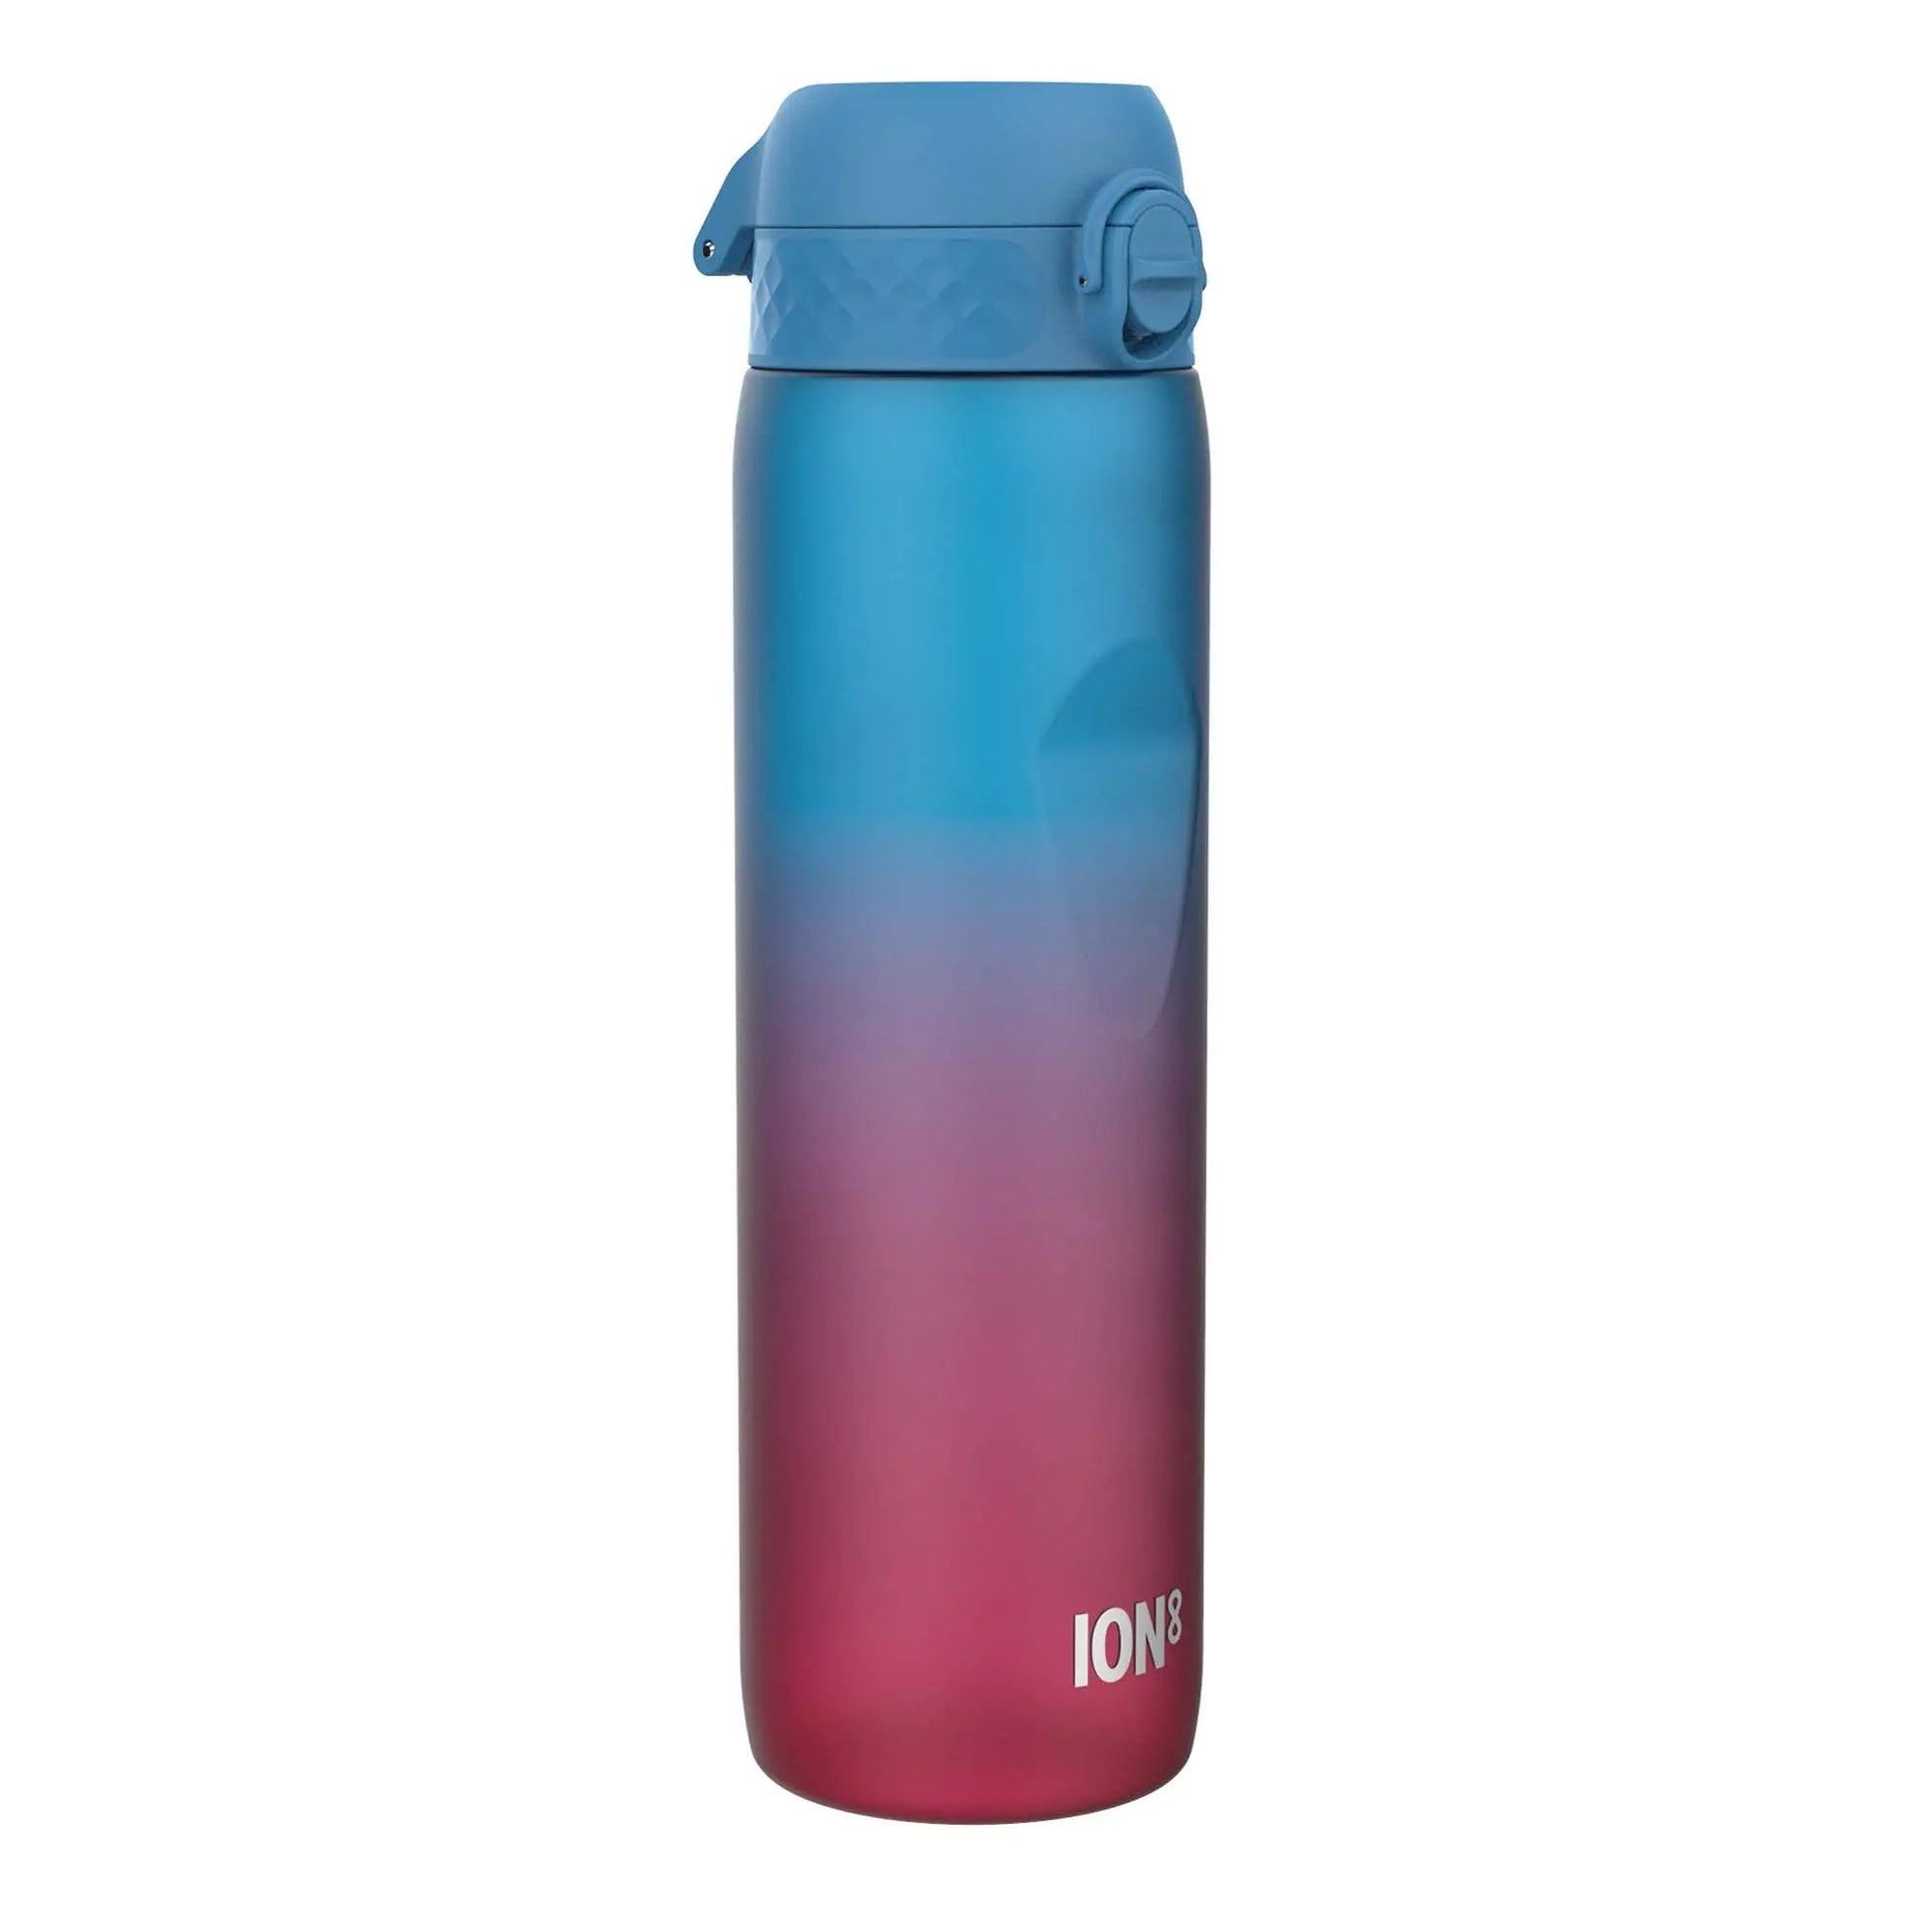 1 litre Water Bottle with Times to Drink, Recyclon™, Motivational Blue & Pink, 1L Ion8